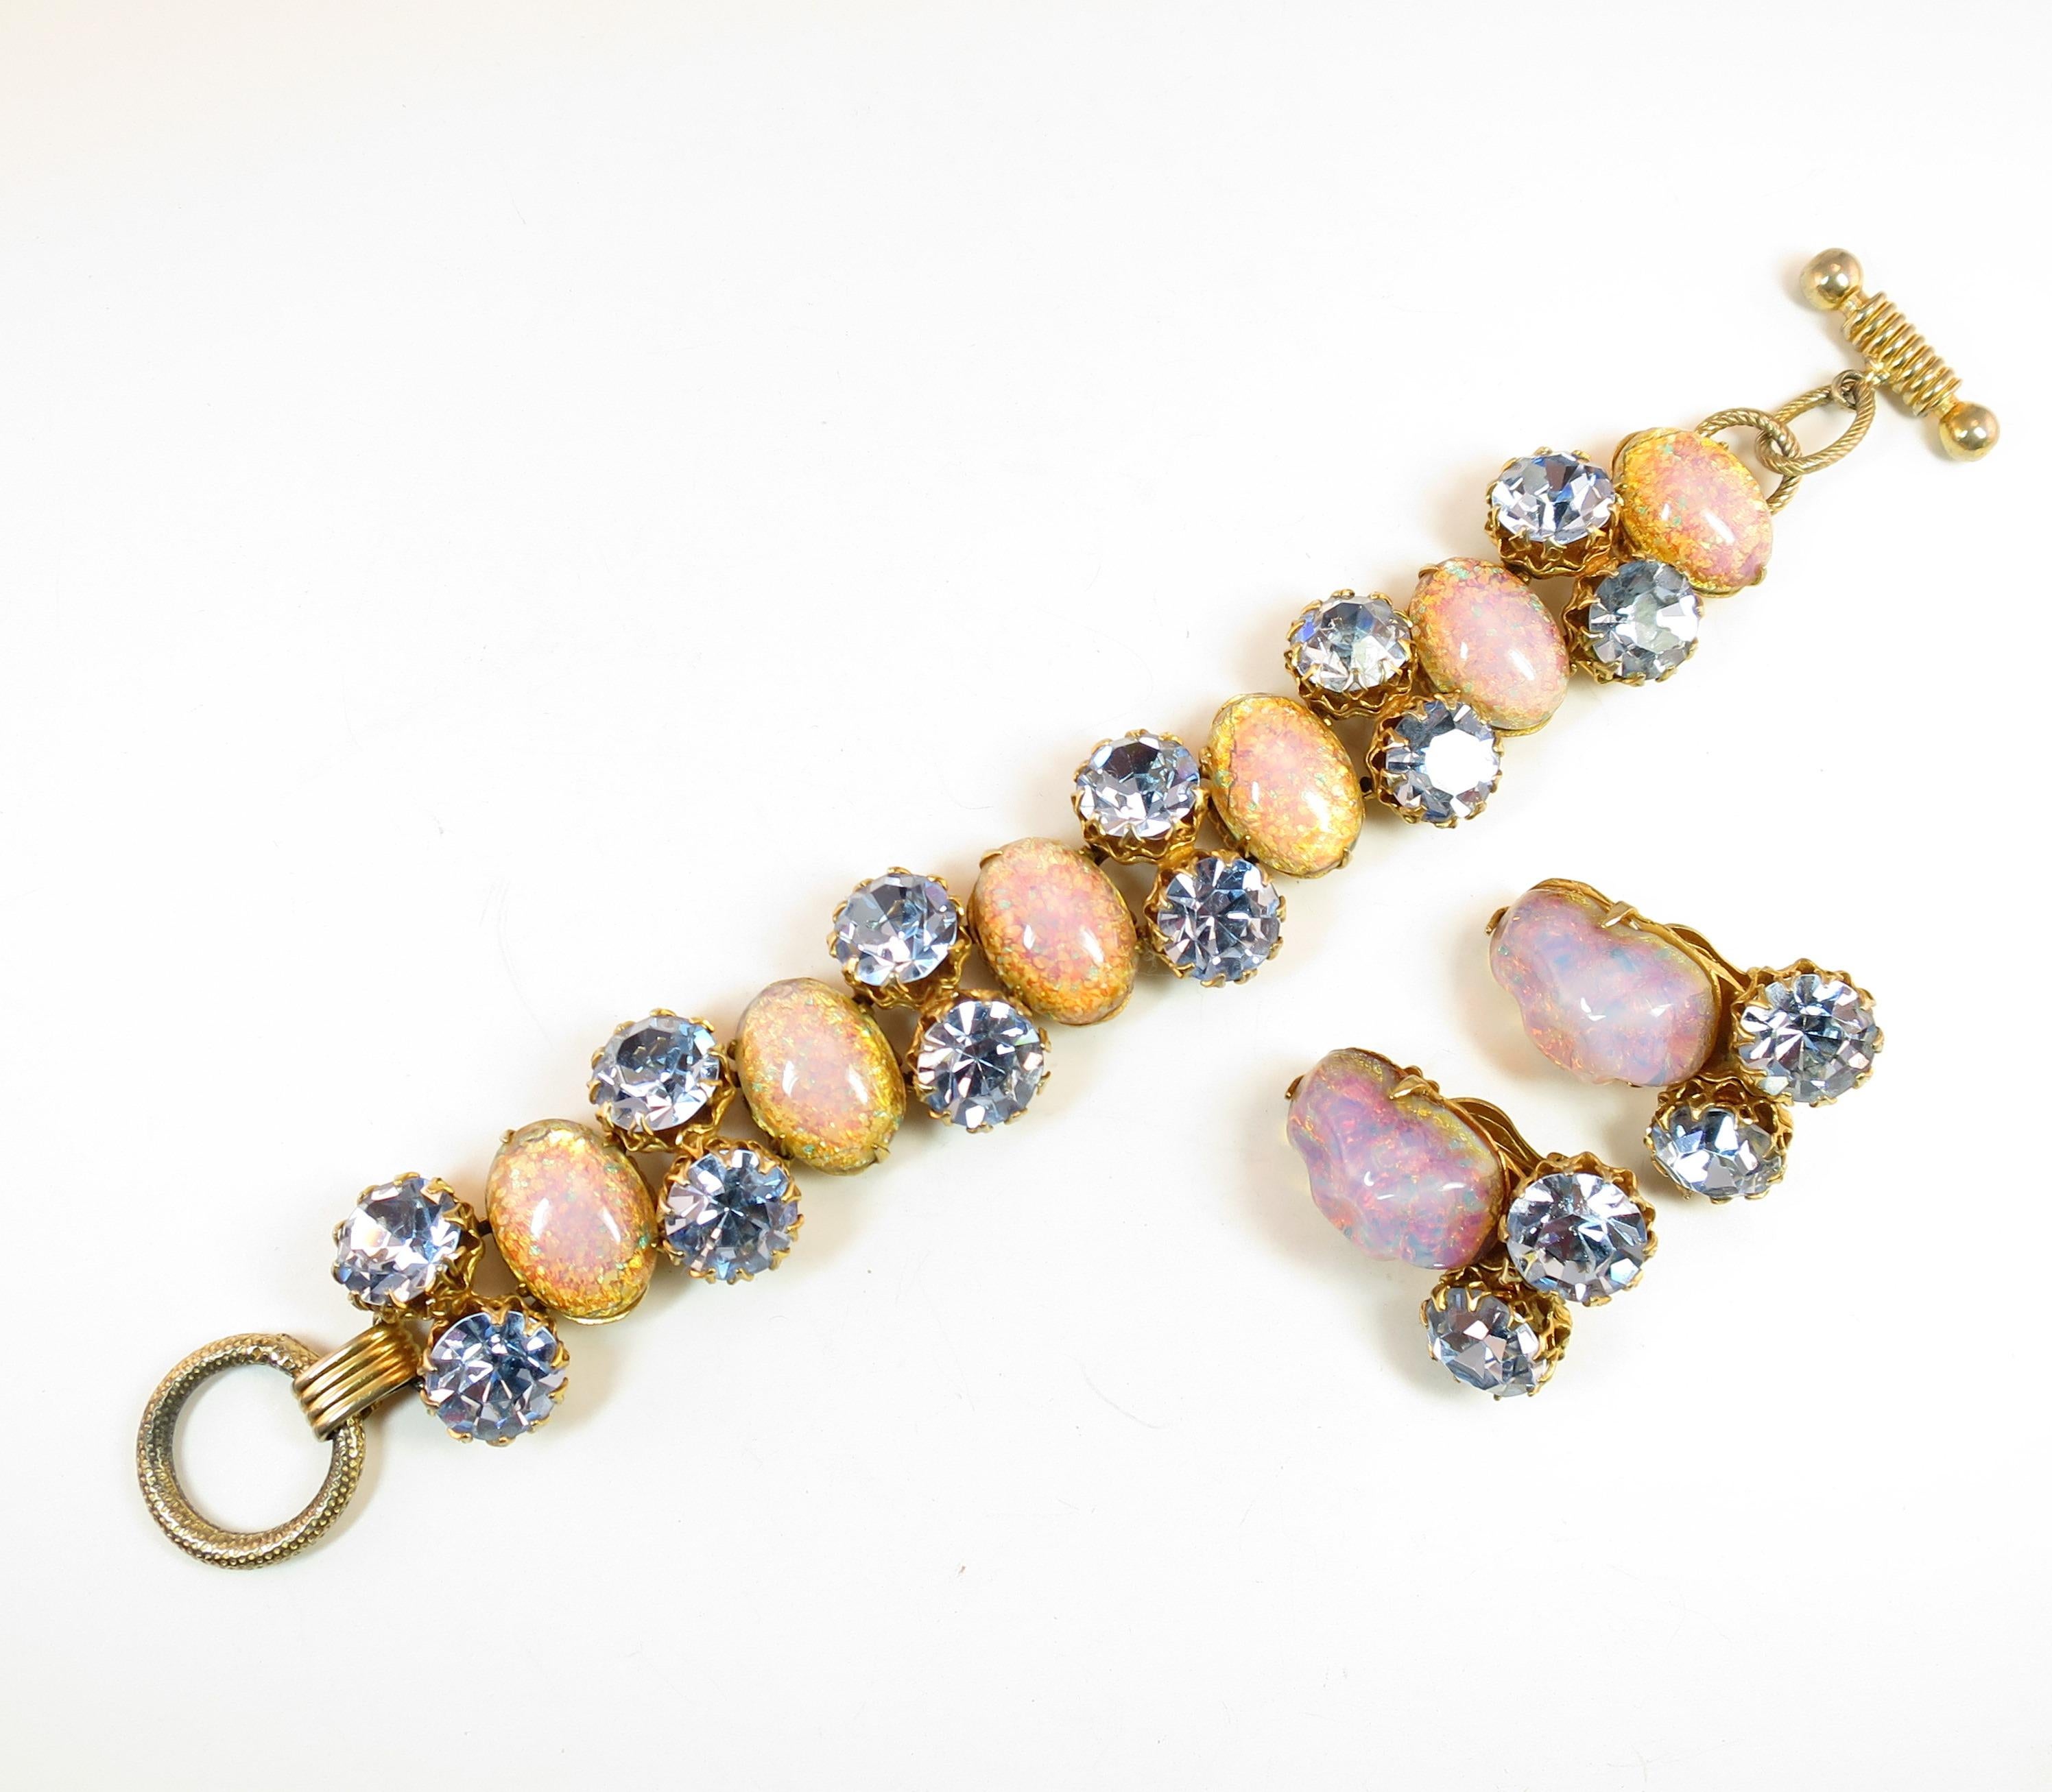 Offered here is a Schiaparelli demi-parure of gold-plated bracelet and clip-back earrings from the 1950s. The segmented design of the bracelet presents oval cabochons of opal art glass alternating with pairs of crown-prong-set faceted blue crystals;